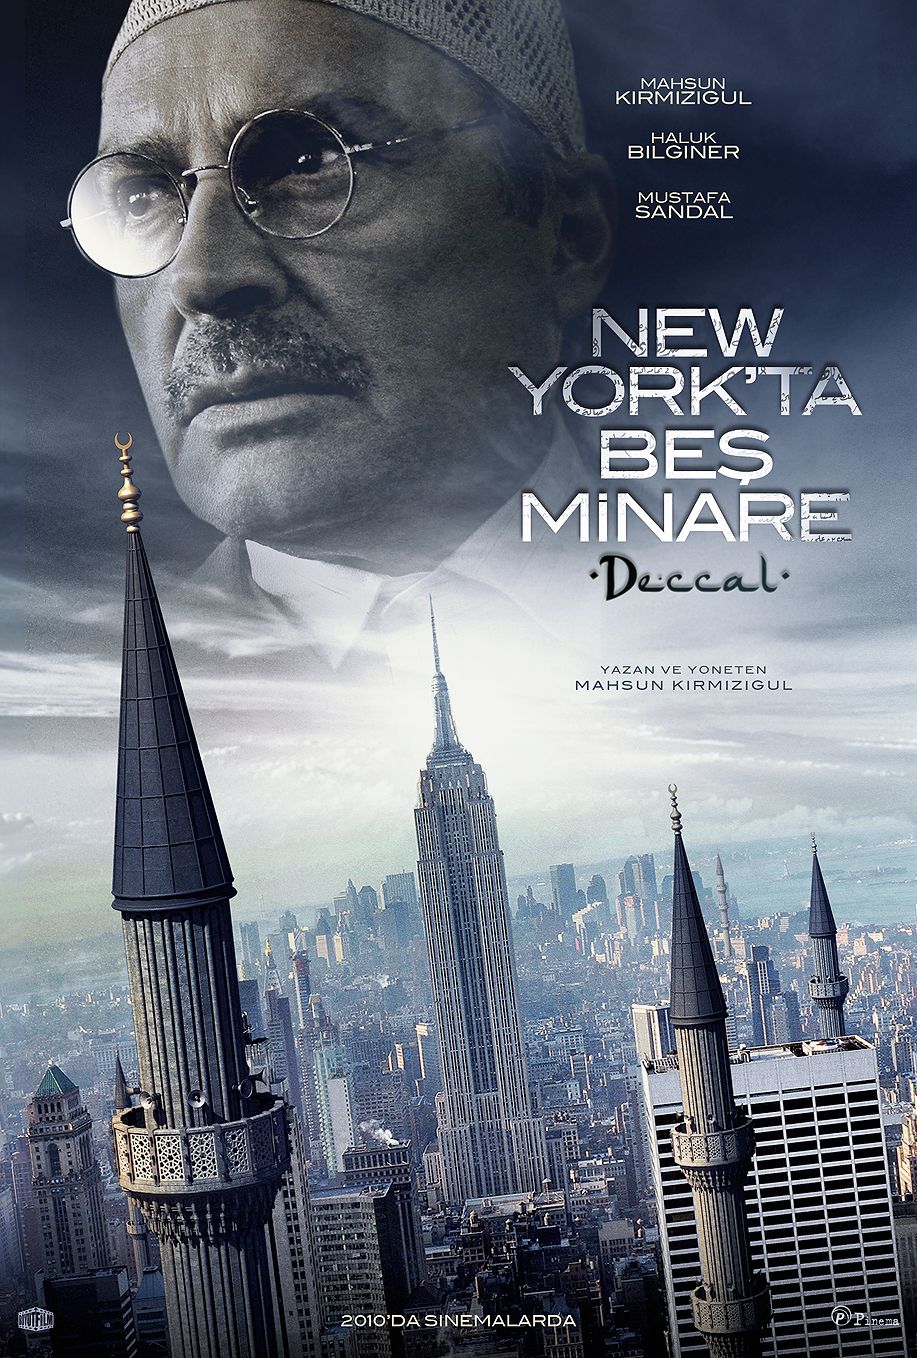 Extra Large Movie Poster Image for New York'ta Be? Minare (#4 of 6)